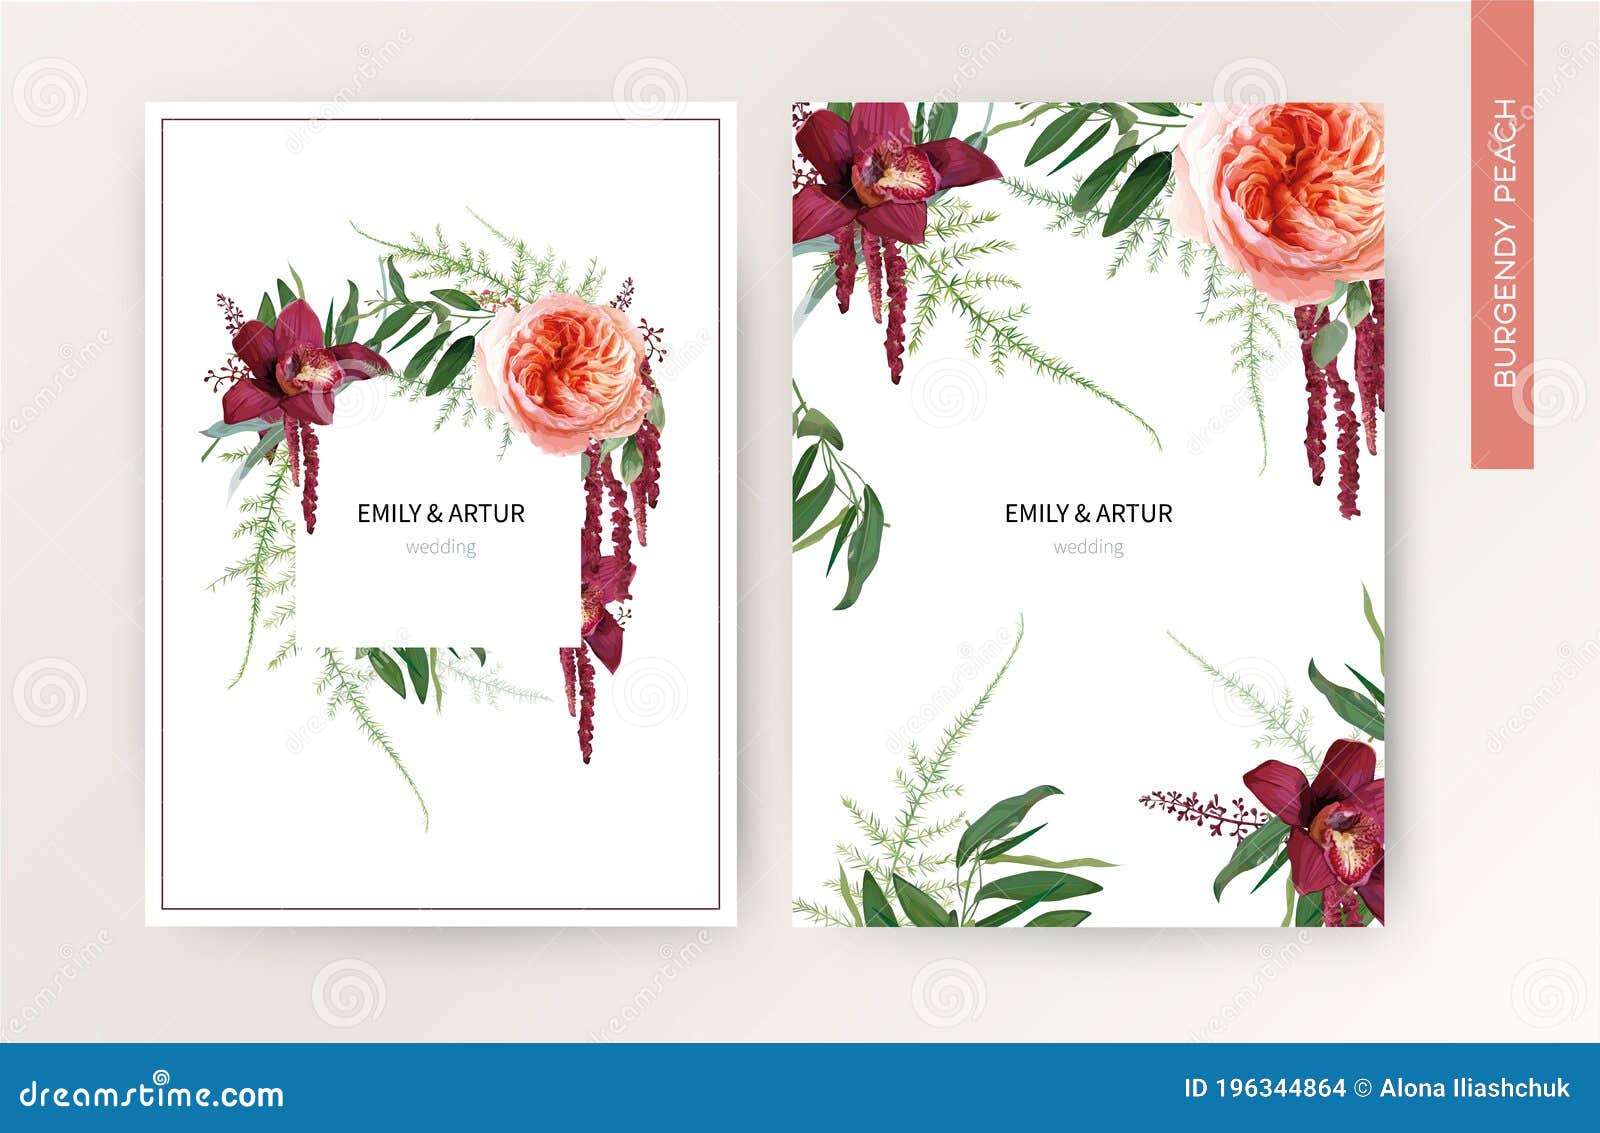 Wedding Invite Card, Tropical Invitation Vector Design. Pale Peach Roses,  Burgundy Red Orchid, Amaranth Flowers, Wild Greenery Stock Vector -  Illustration of nature, celebration: 196344864